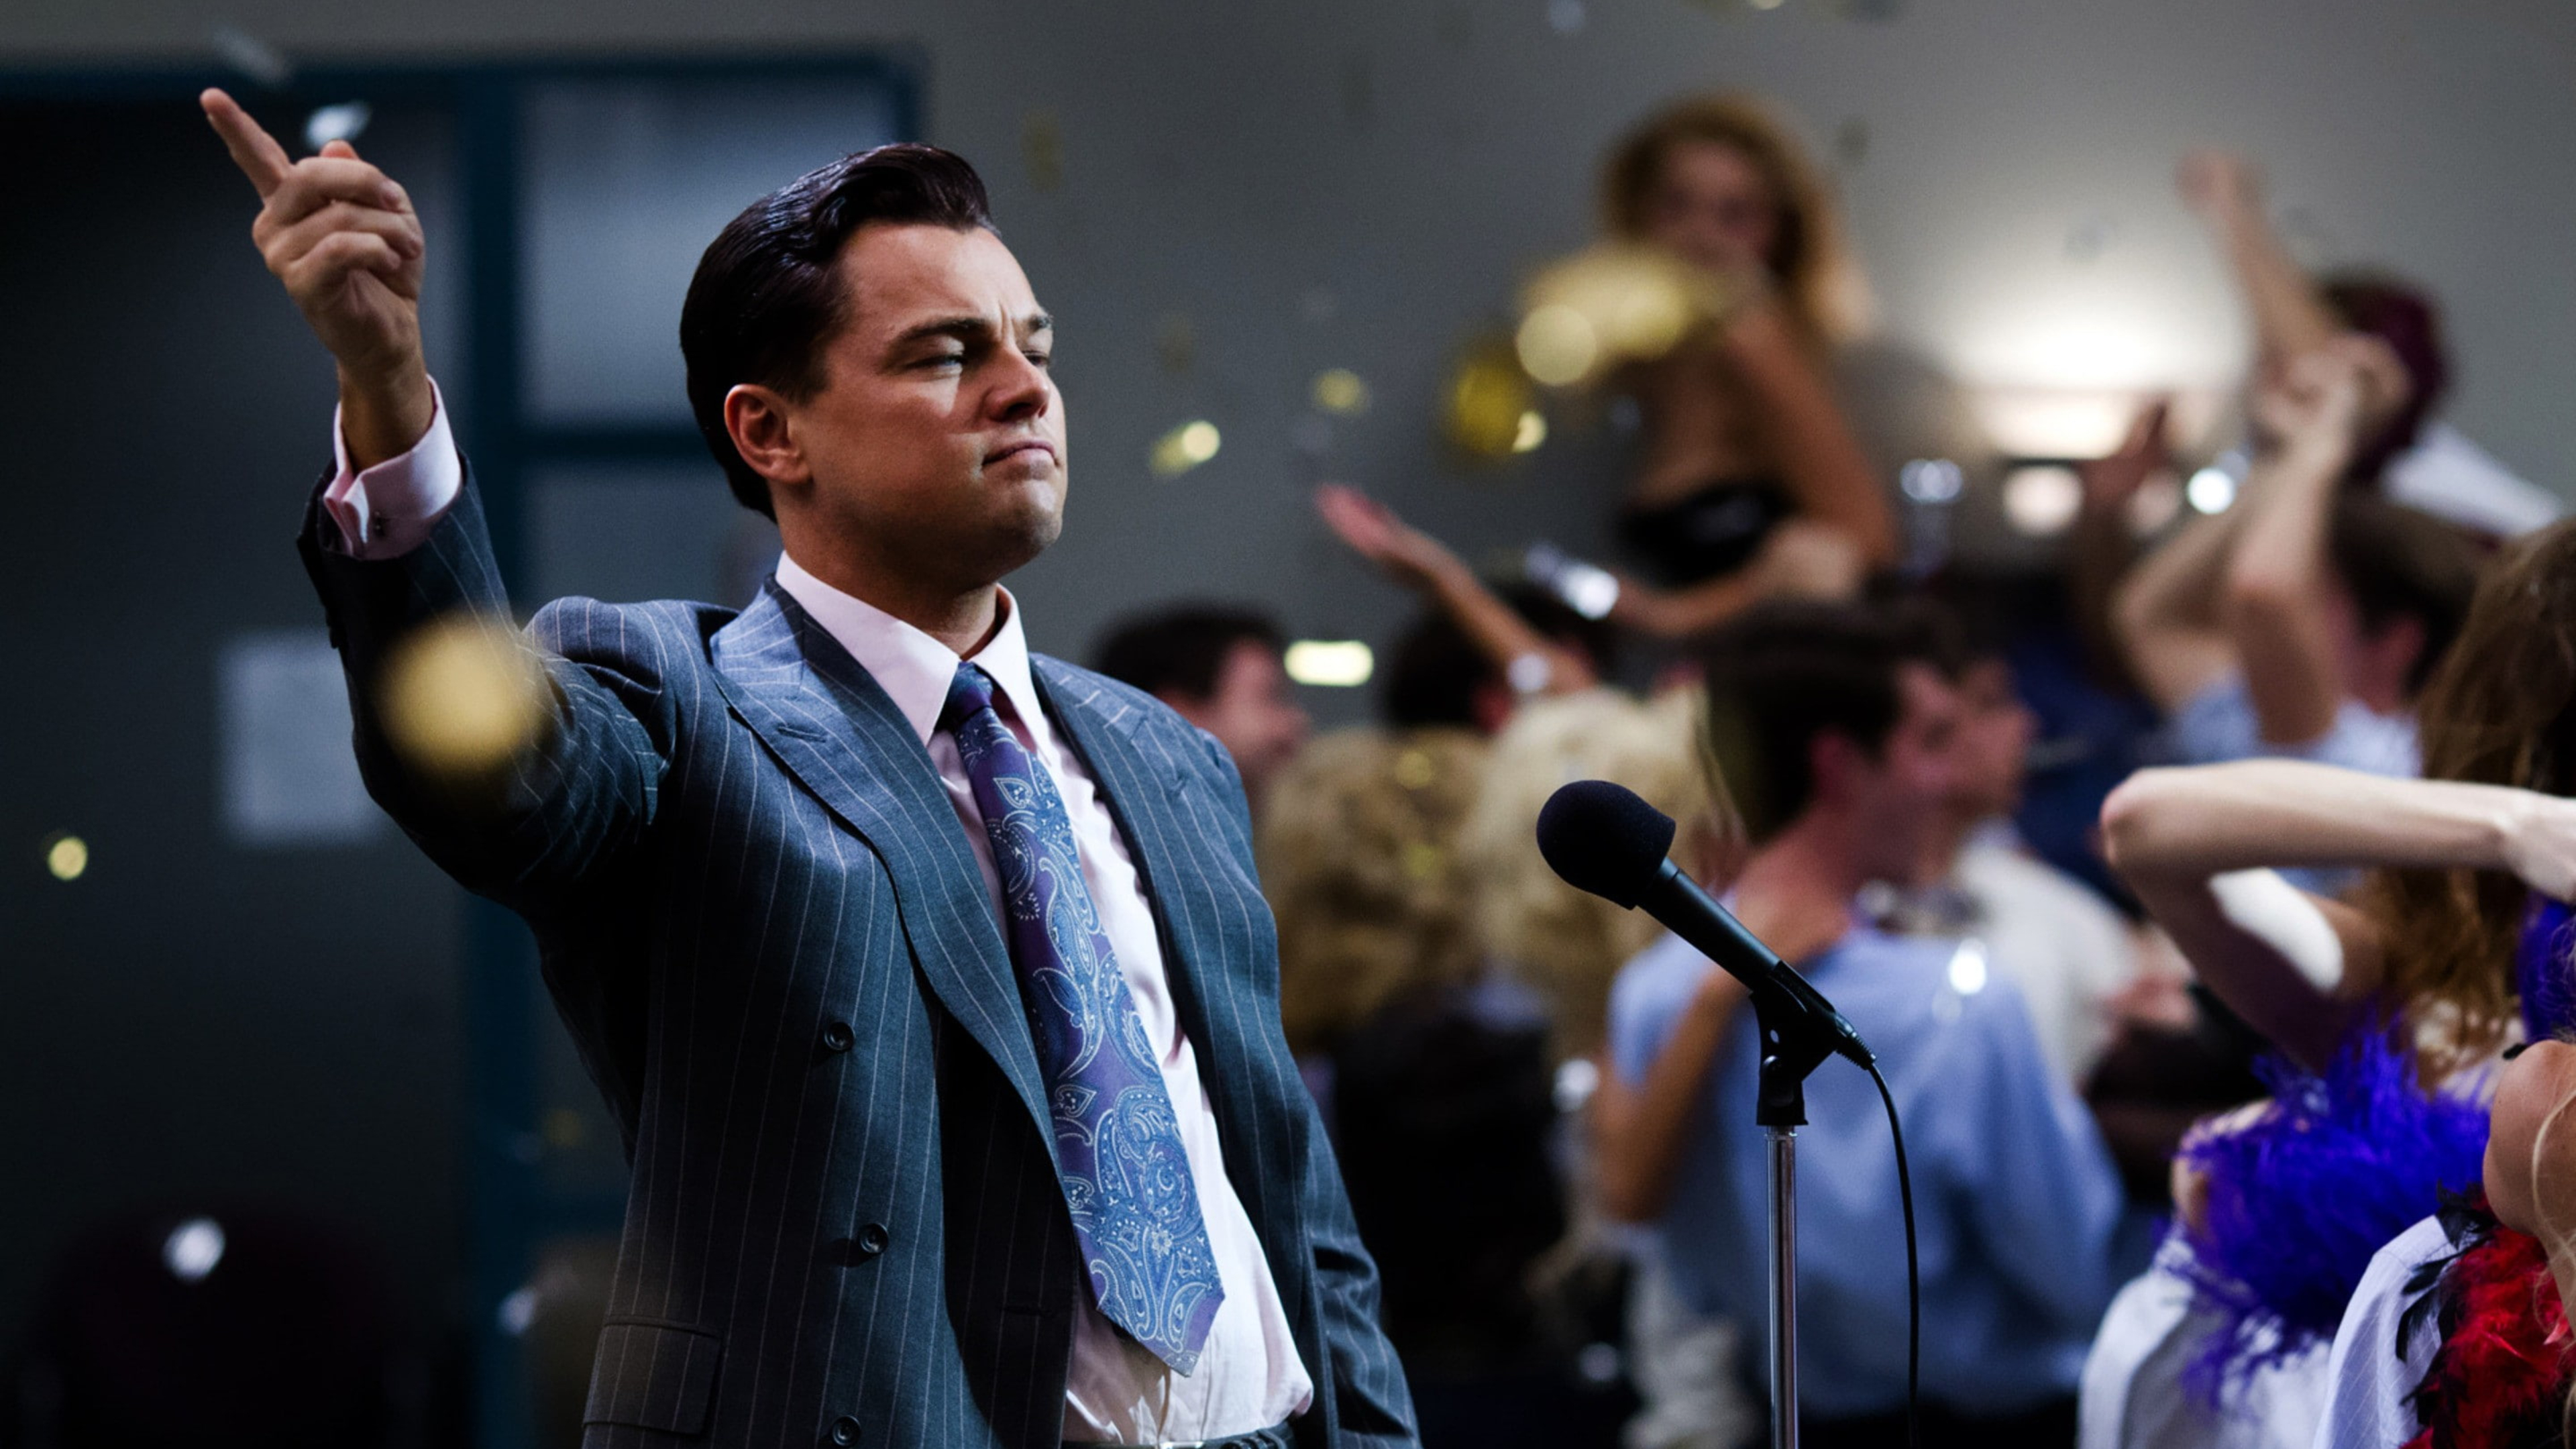 Papel de Parede do The Wolf Of Wall Street